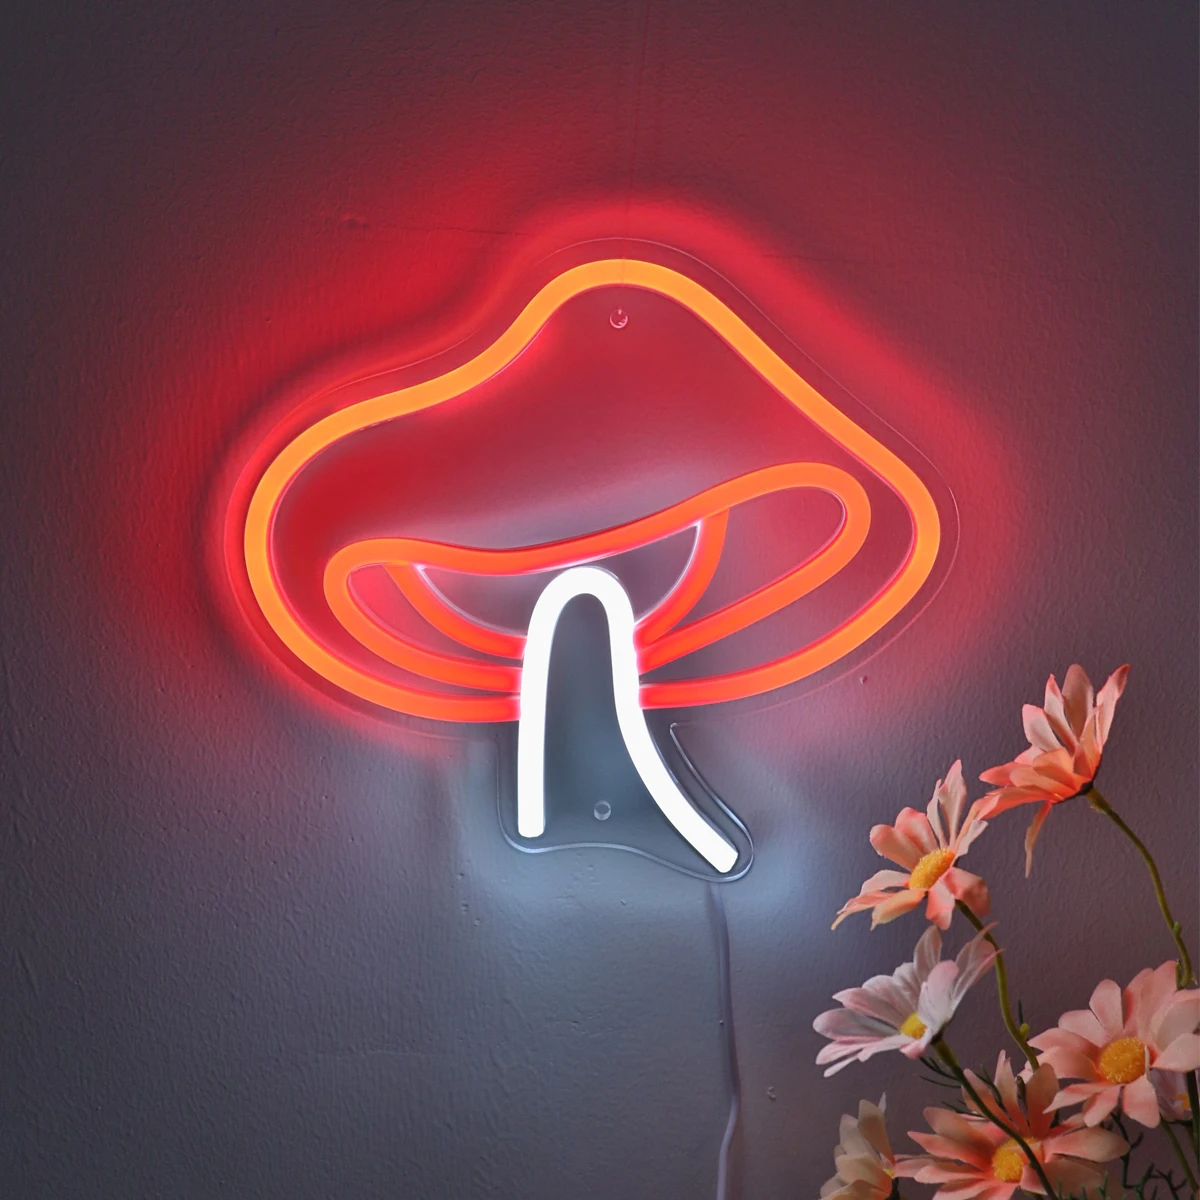 

1pc Red Mushroom LED Wall Neon Sign Night Light Mood Lamp 5V USB Powered For Room Shop Party Decoration Gifts 8.62''*7.8''